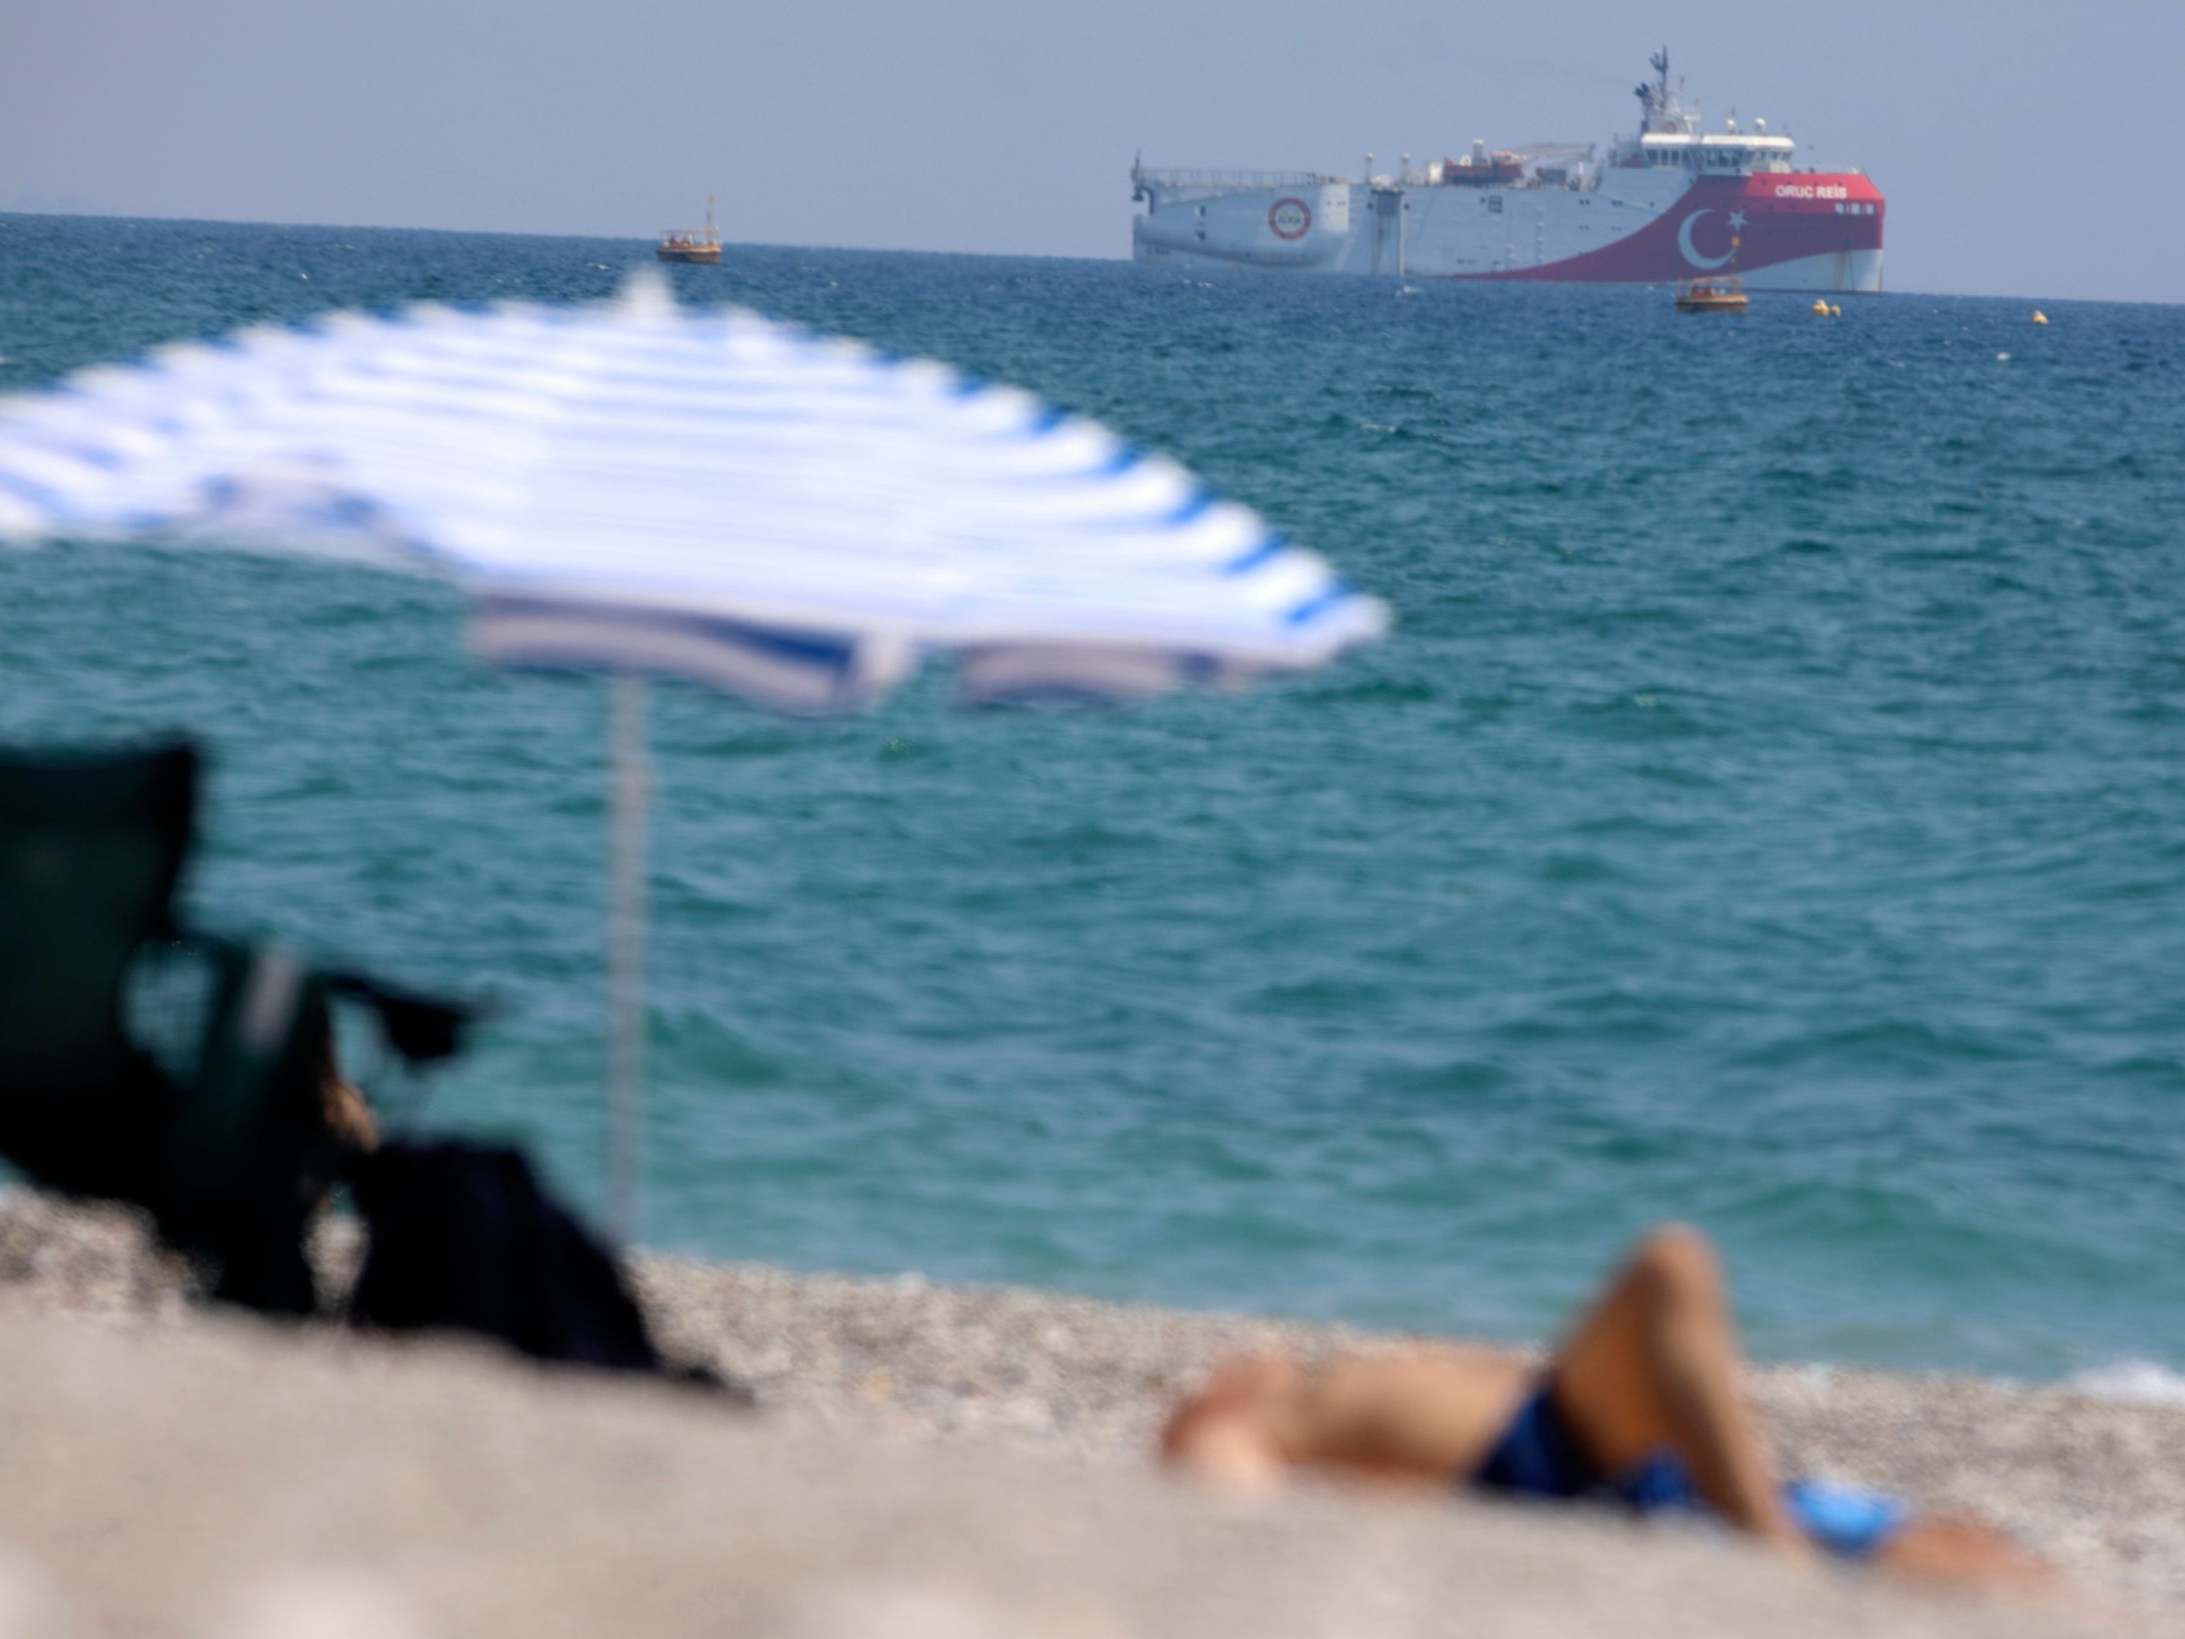 The research vessel is anchored off the southeast Turkish port of Antalya